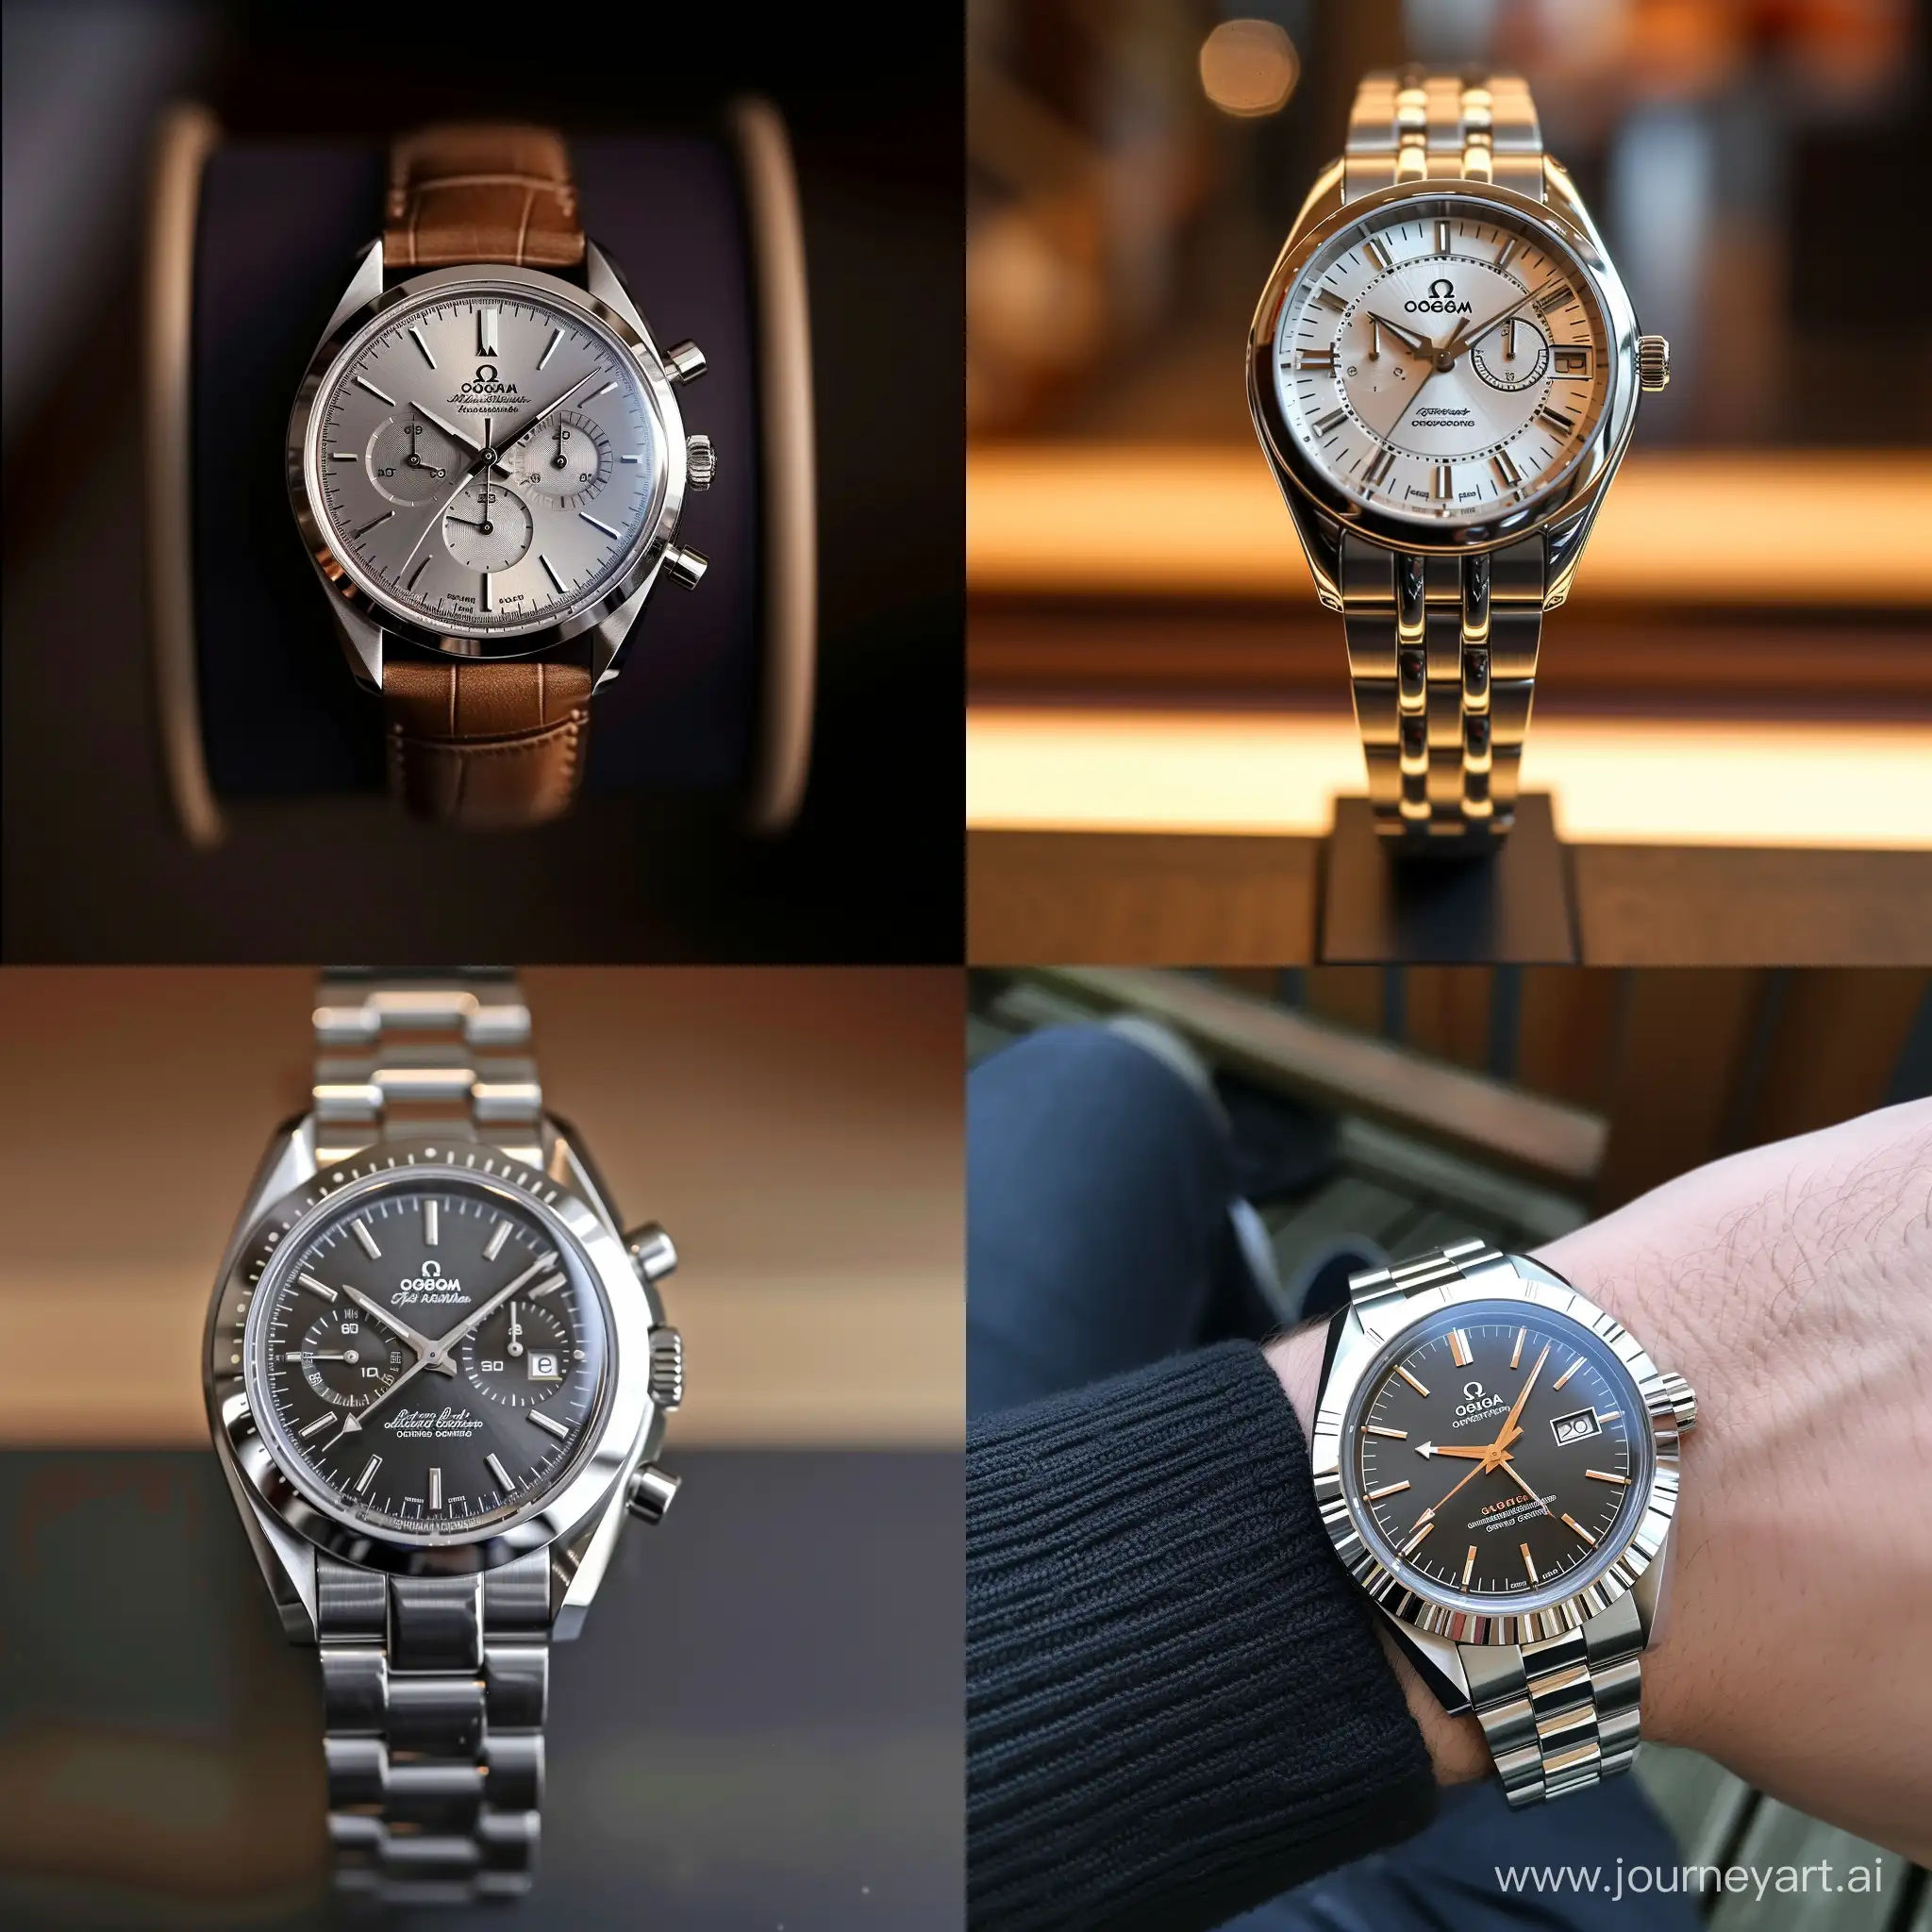 Luxurious-Omega-Wristwatch-with-Versatile-Design-Model-V6-Artistic-Refinement-11-and-Distinctive-Serial-Number-64177